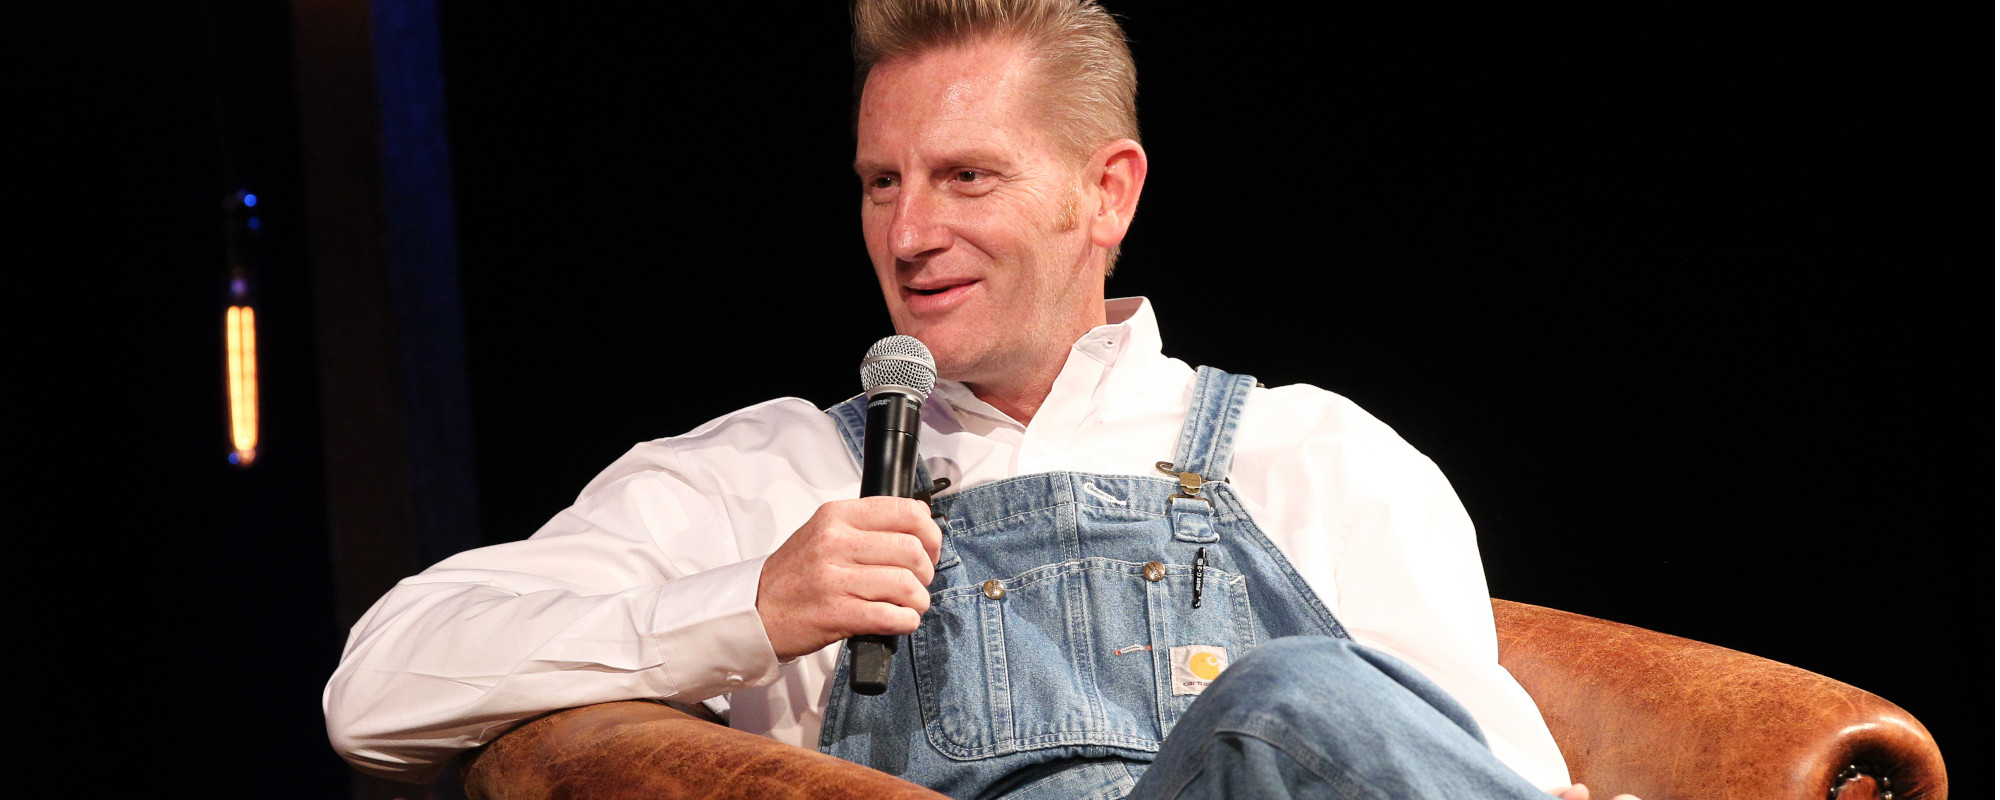 Rory Feek Remembers Wife Joey on Eighth Aniversary of Her Death